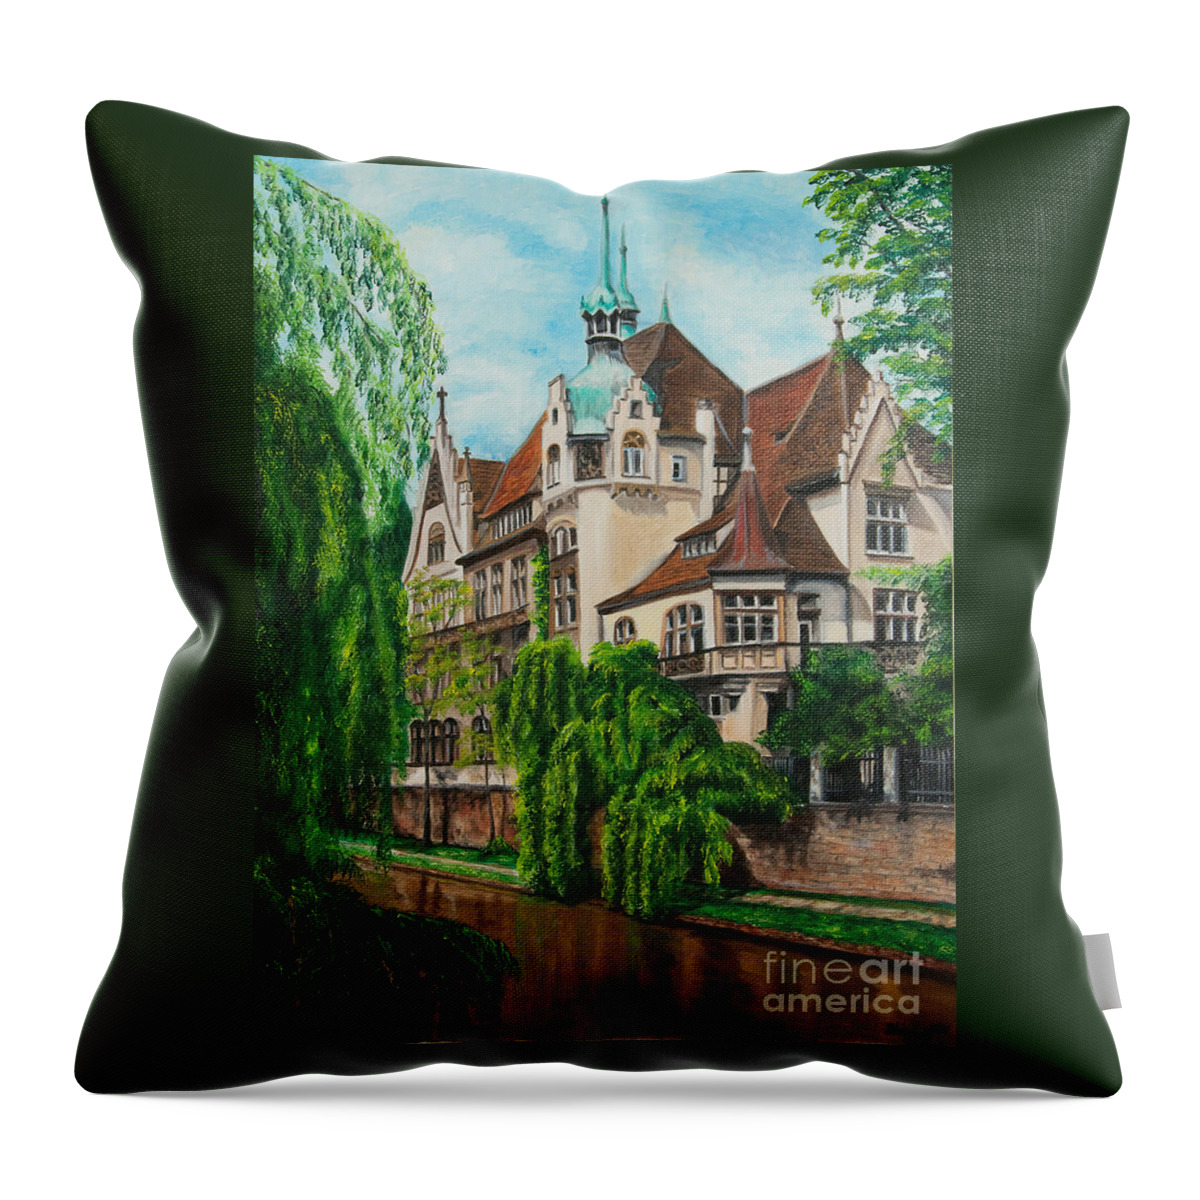 Dream House Throw Pillow featuring the painting My Dream House by Charlotte Blanchard